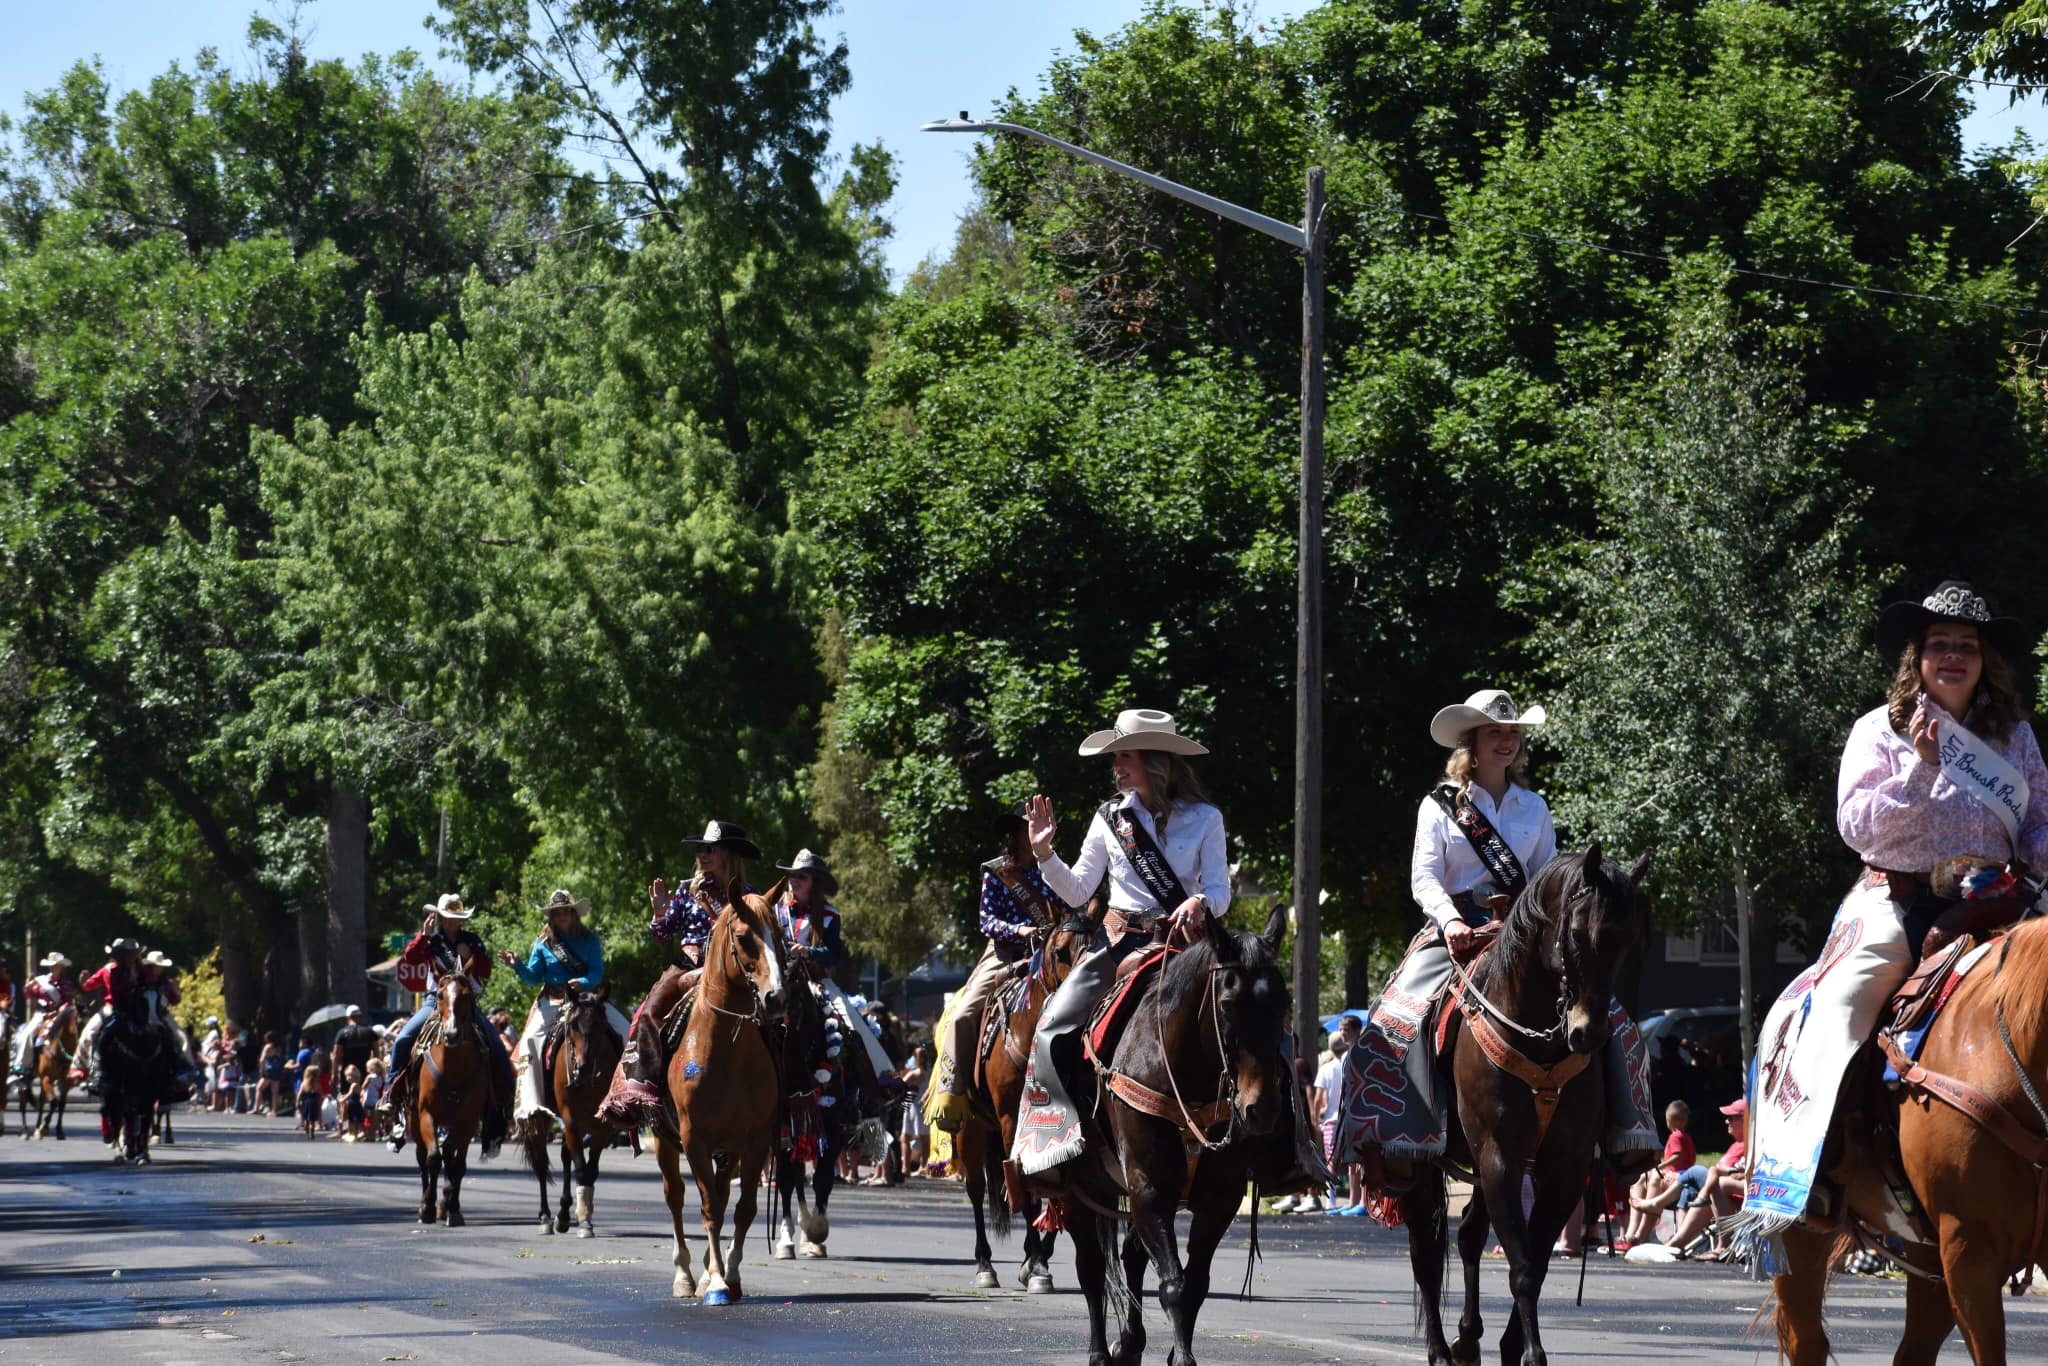 Parade down a street with several horses and cowgirls waving